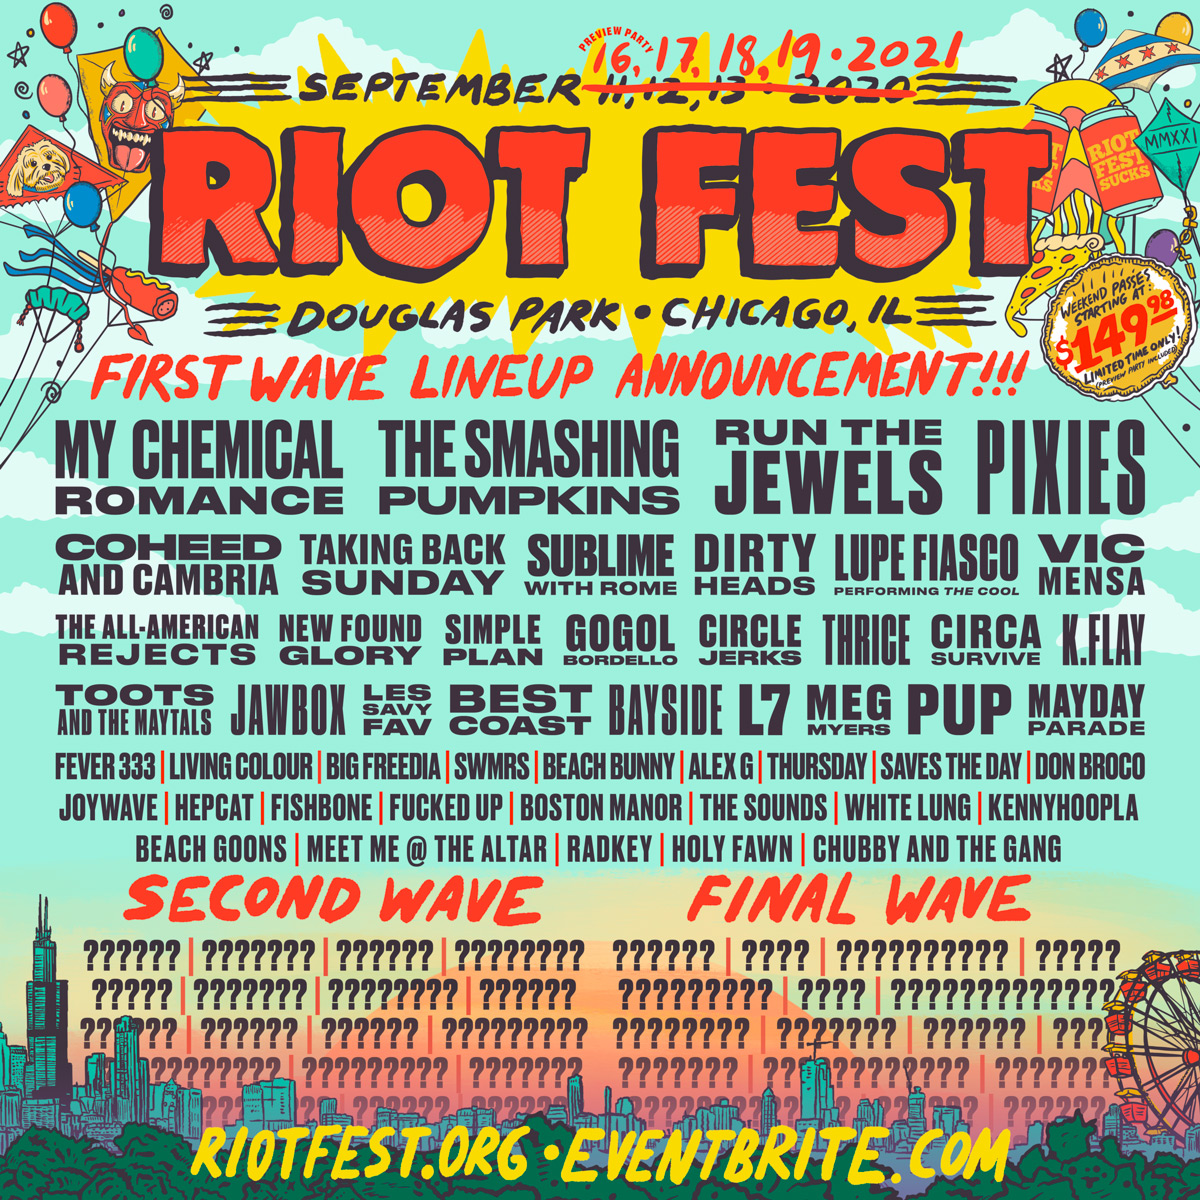 CONTEST TIME: Riot Fest is moving... to September 17-19, 2021. First wave lineup is here. RT for your chance to win a pair of Riot Fest 2021 VIP Tickets. We’ll pick a winner on June 26th. Tickets are on sale now: ow.ly/J9Eq30qQCt4